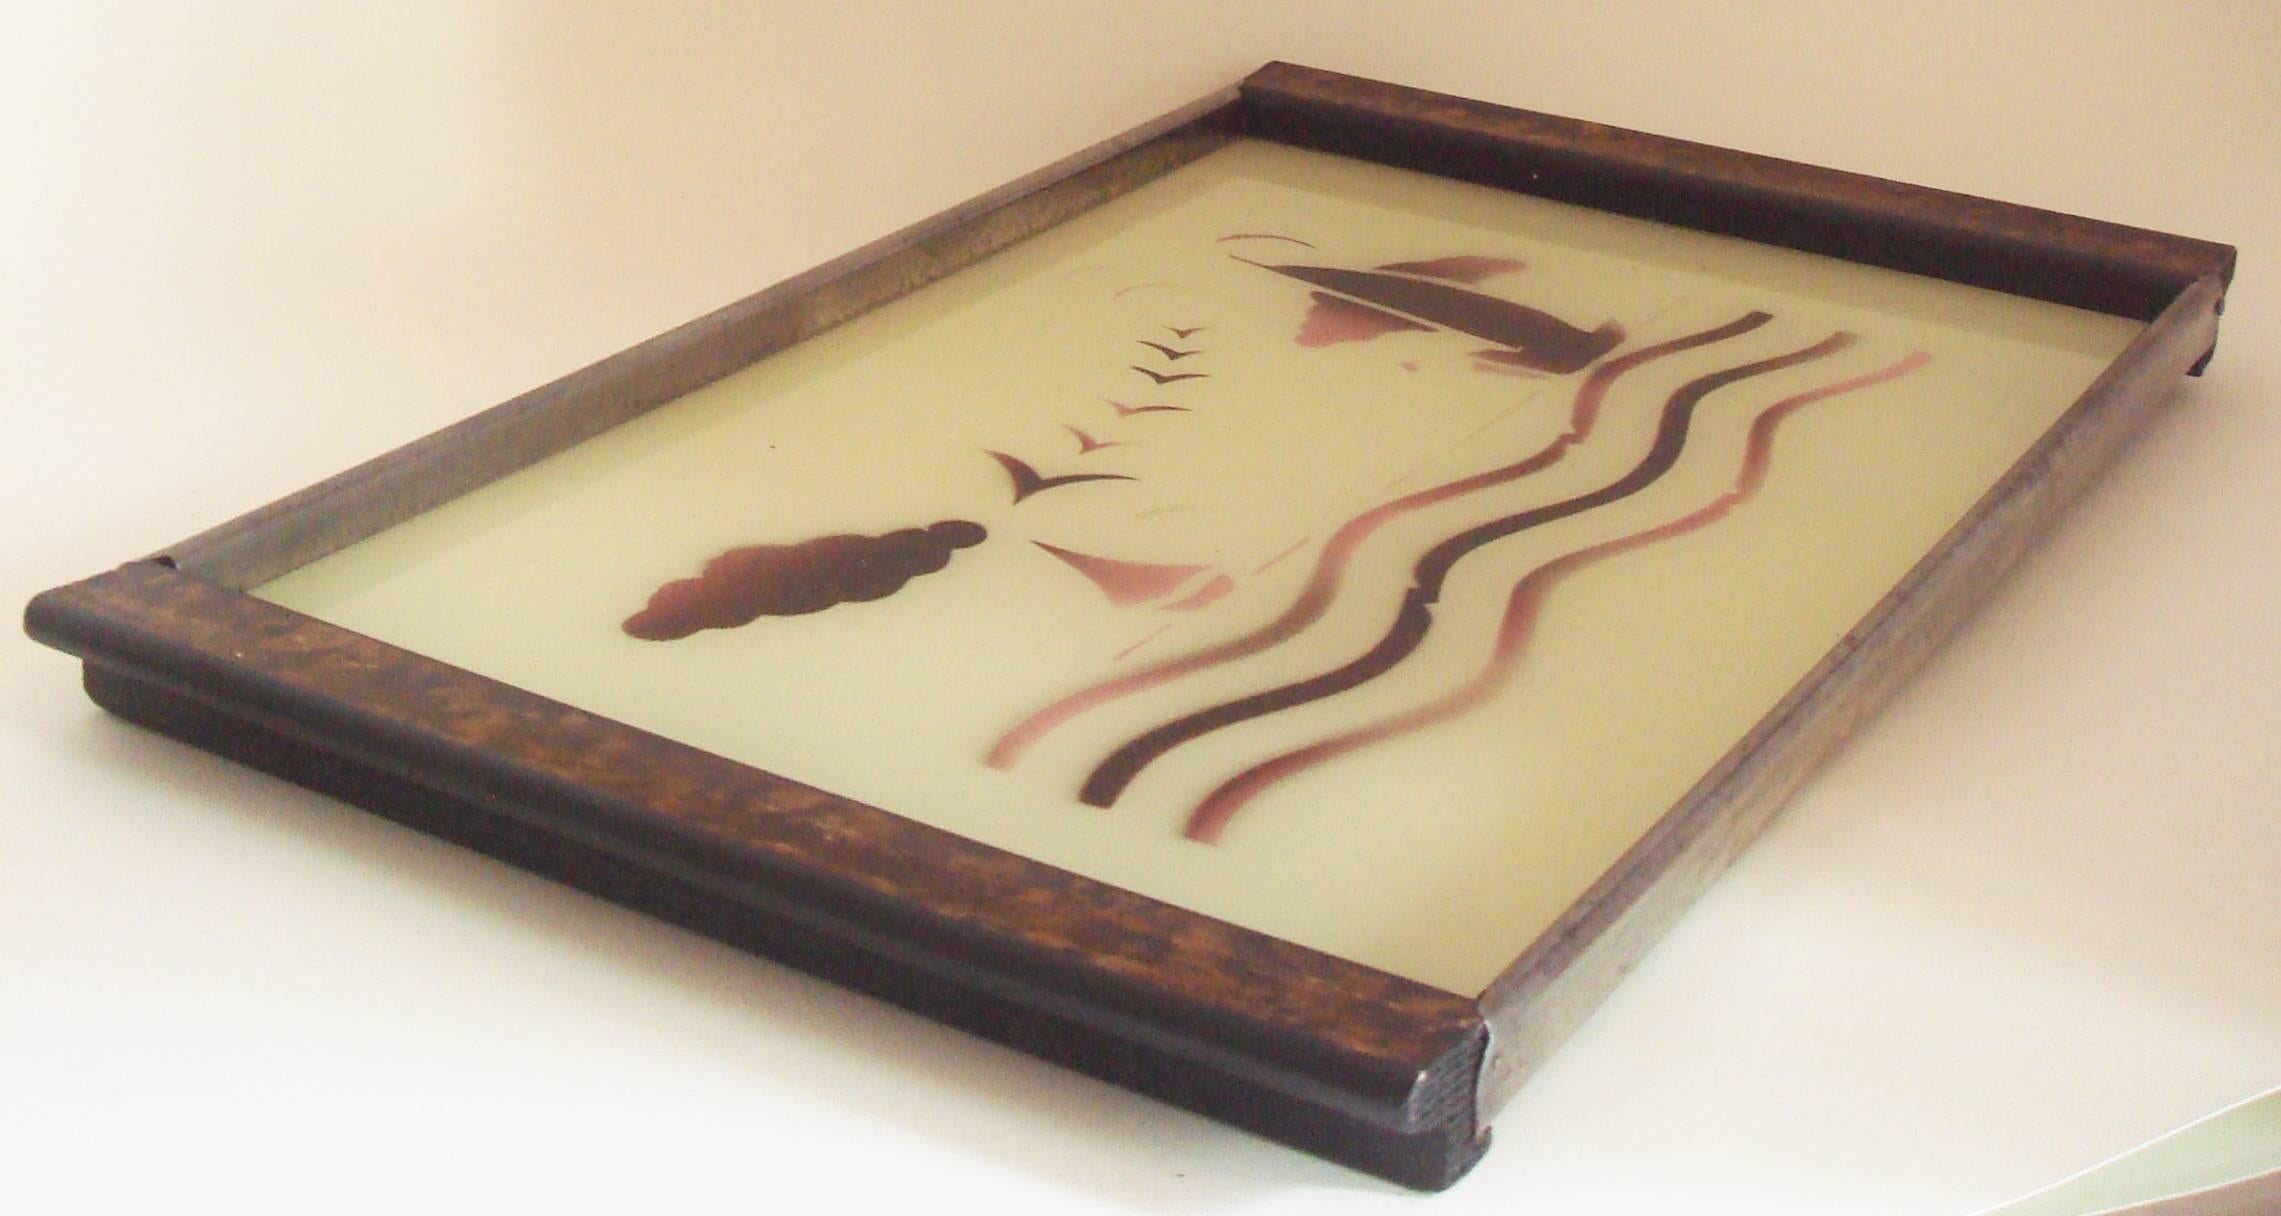 The design of this German Bauhaus Spritzdekor (or airbrushed) cocktail tray is unusual as it features a stylized figurative seascape with yachts and seabirds whereas the majority of Spritzdekor items have abstract patterns. This reverse painted